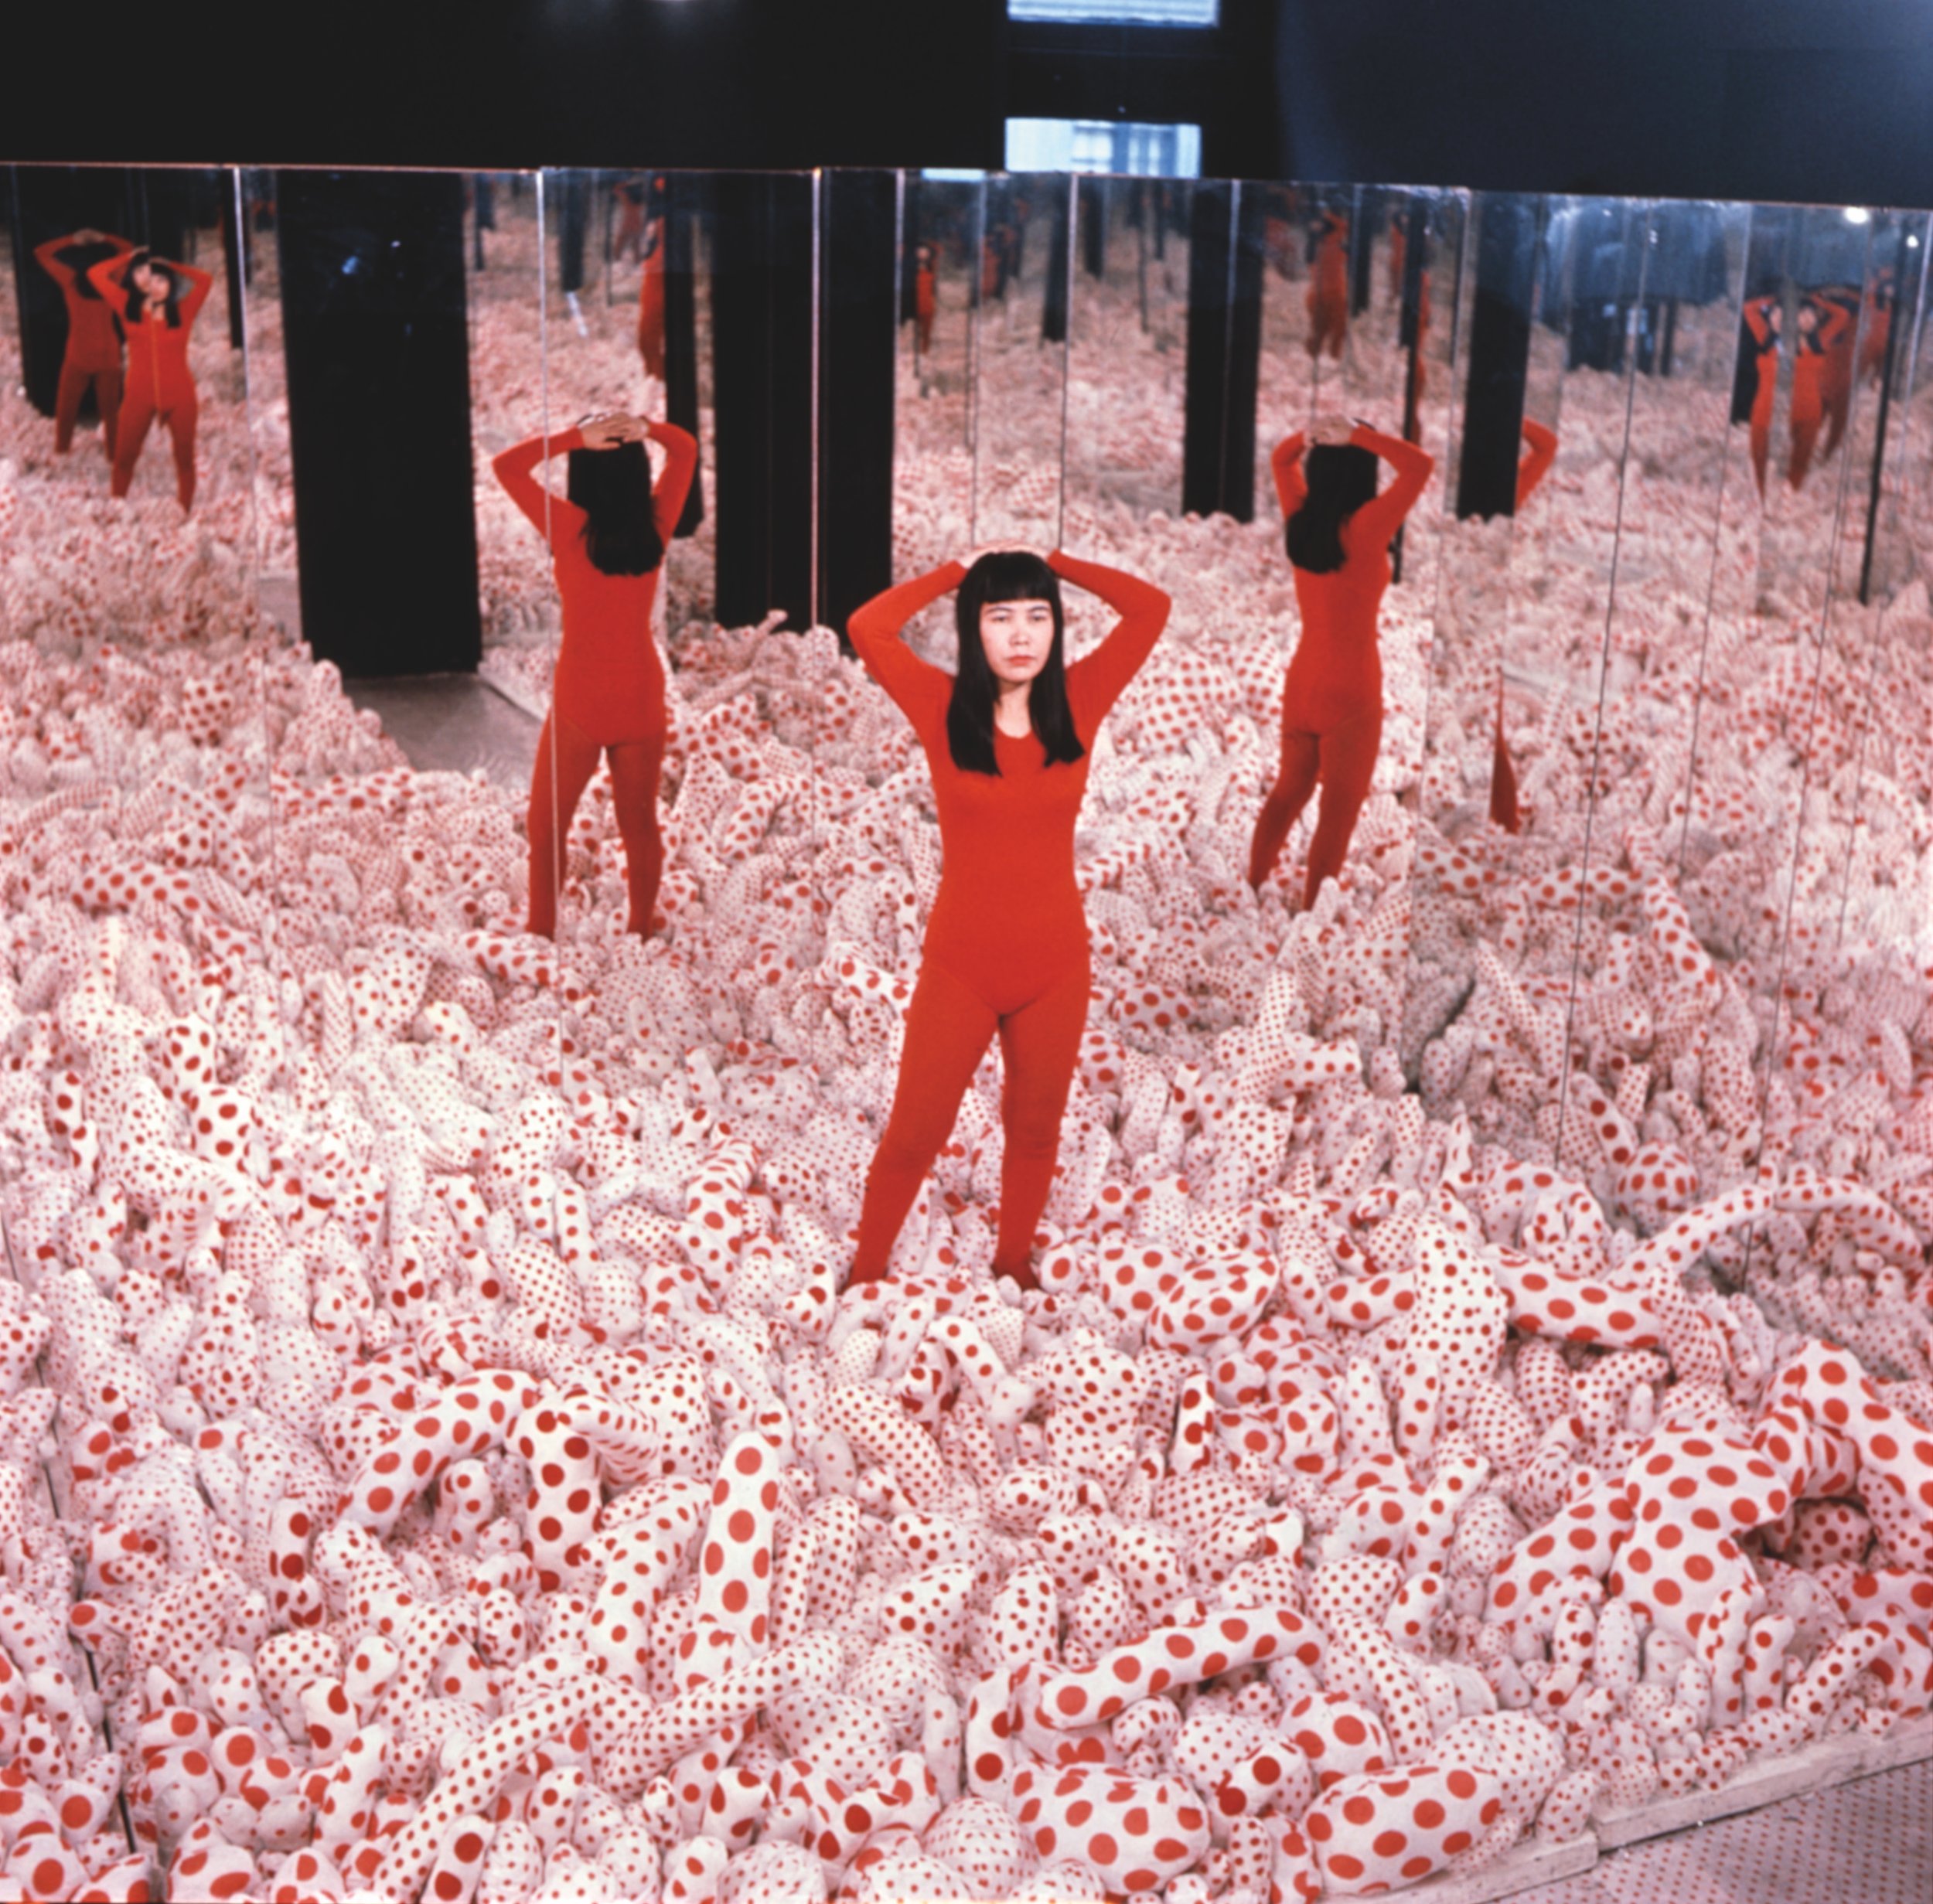  During her time as director of the Smithsonian’s Hirshhorn Museum and Sculpture Garden in Washington D.C., Chiu played a major role in making Yayoi Kusama’s first-ever exhibition of six Infinity Rooms in 2018 happen; it was the Hirshhorn’s most popu